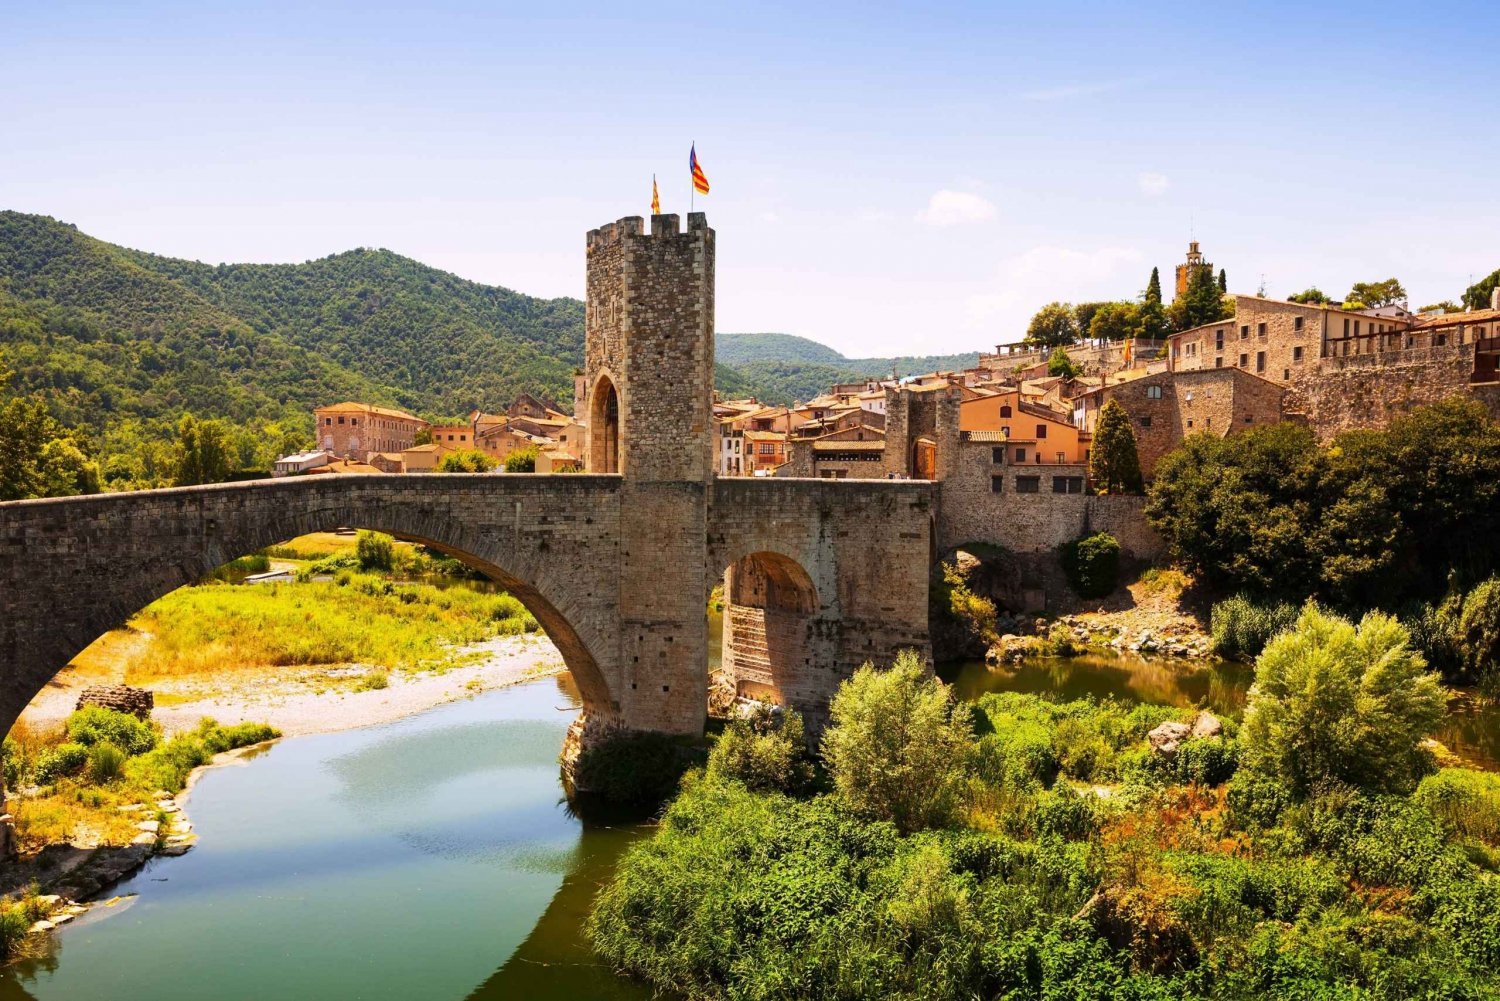 Barcelona: Besalú & Medieval Towns Tour with Hotel Pickup